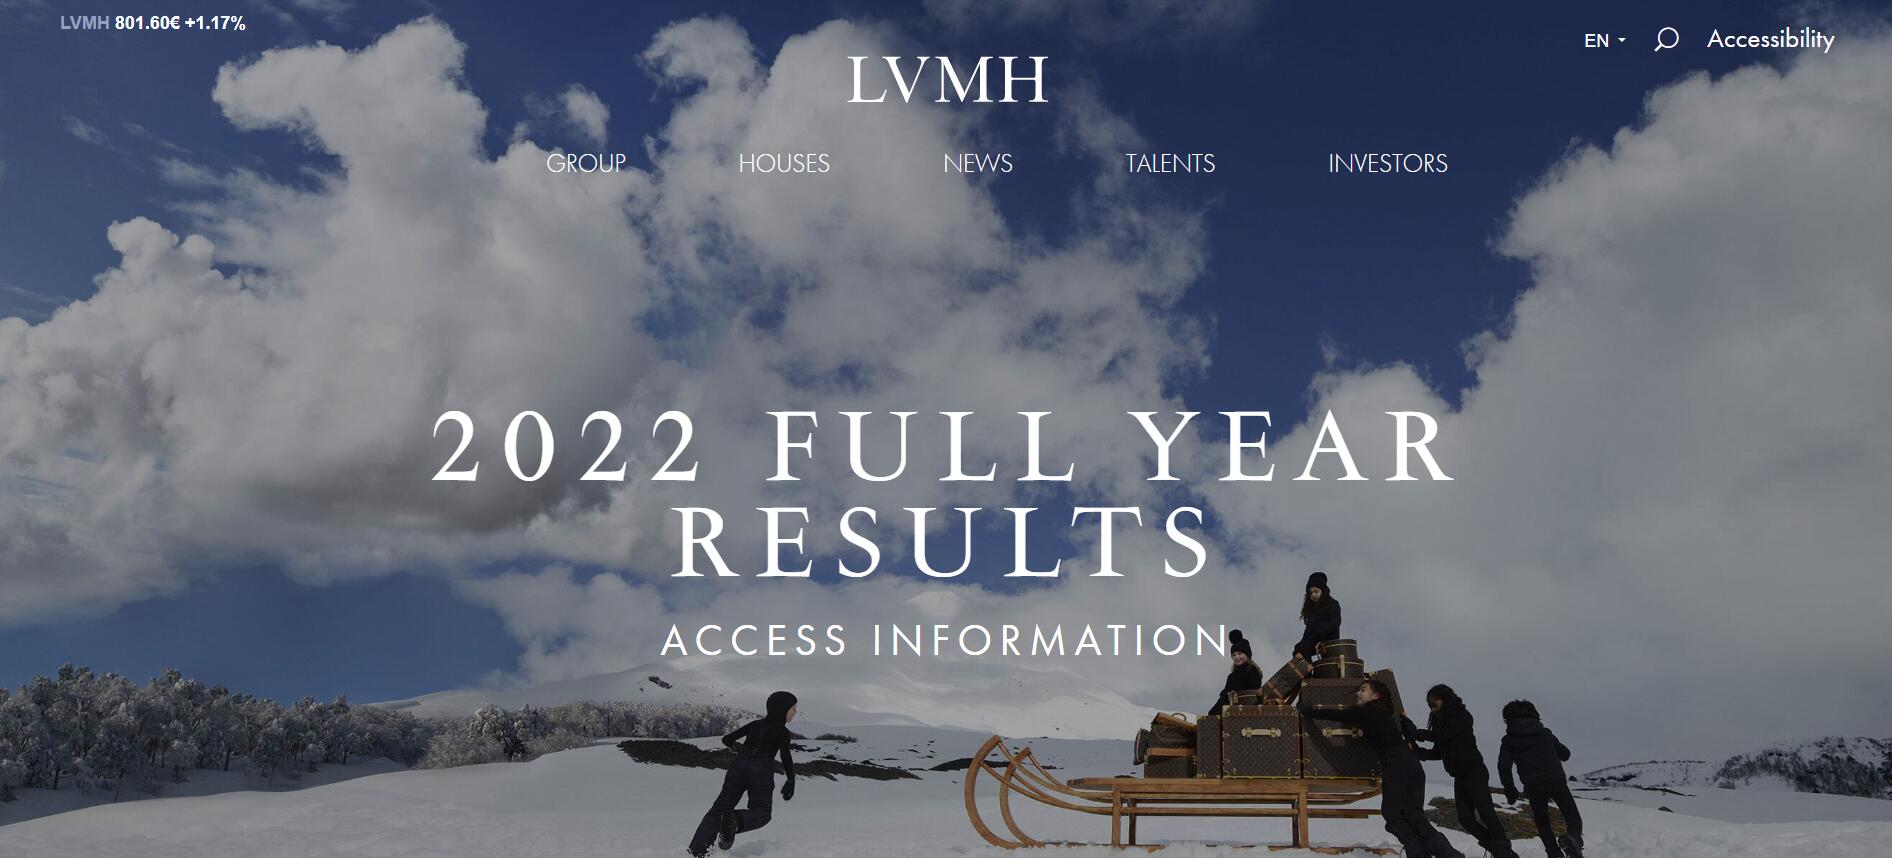 LVMH 2022 Results: All Business Groups Gained Growth; Louis Vuitton Annual Revenue Exceeded € 20 Billion for the First Time